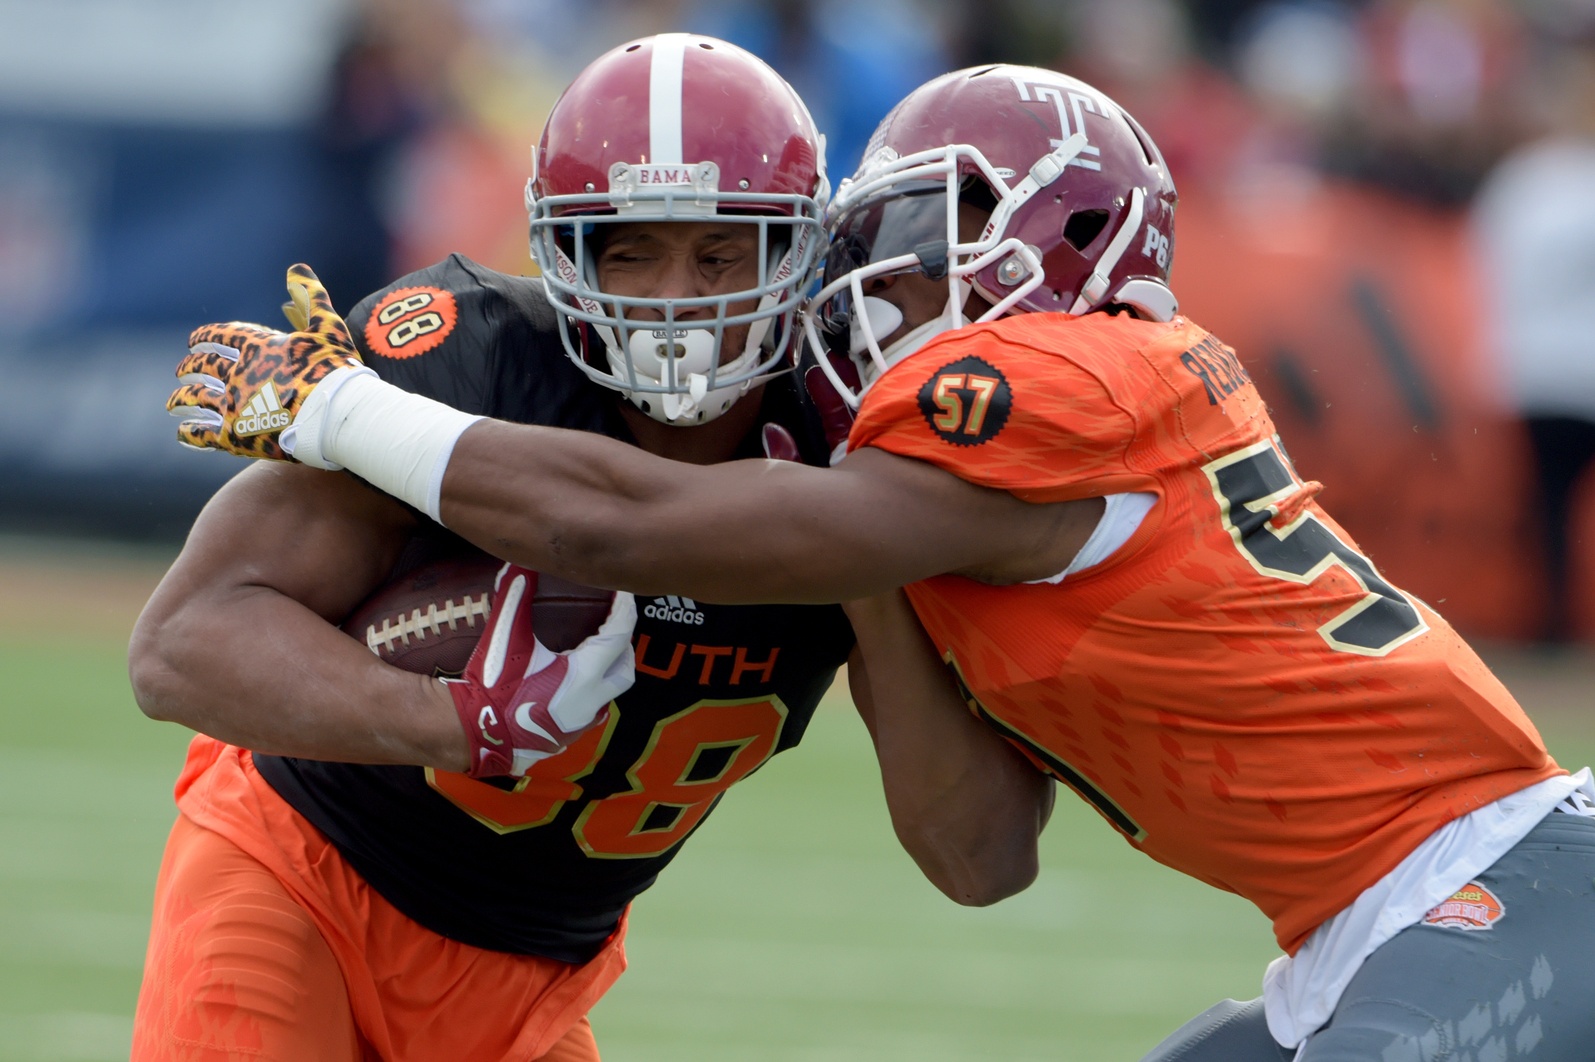 Jan 28, 2017; Mobile, AL, USA; South squad tight end O.J. Howard of Alabama (88) is tackled by North squad inside linebacker Haason Reddick of Temple (57) after a pass reception during the first quarter of the 2017 Senior Bowl at Ladd-Peebles Stadium. Mandatory Credit: Glenn Andrews-USA TODAY Sports